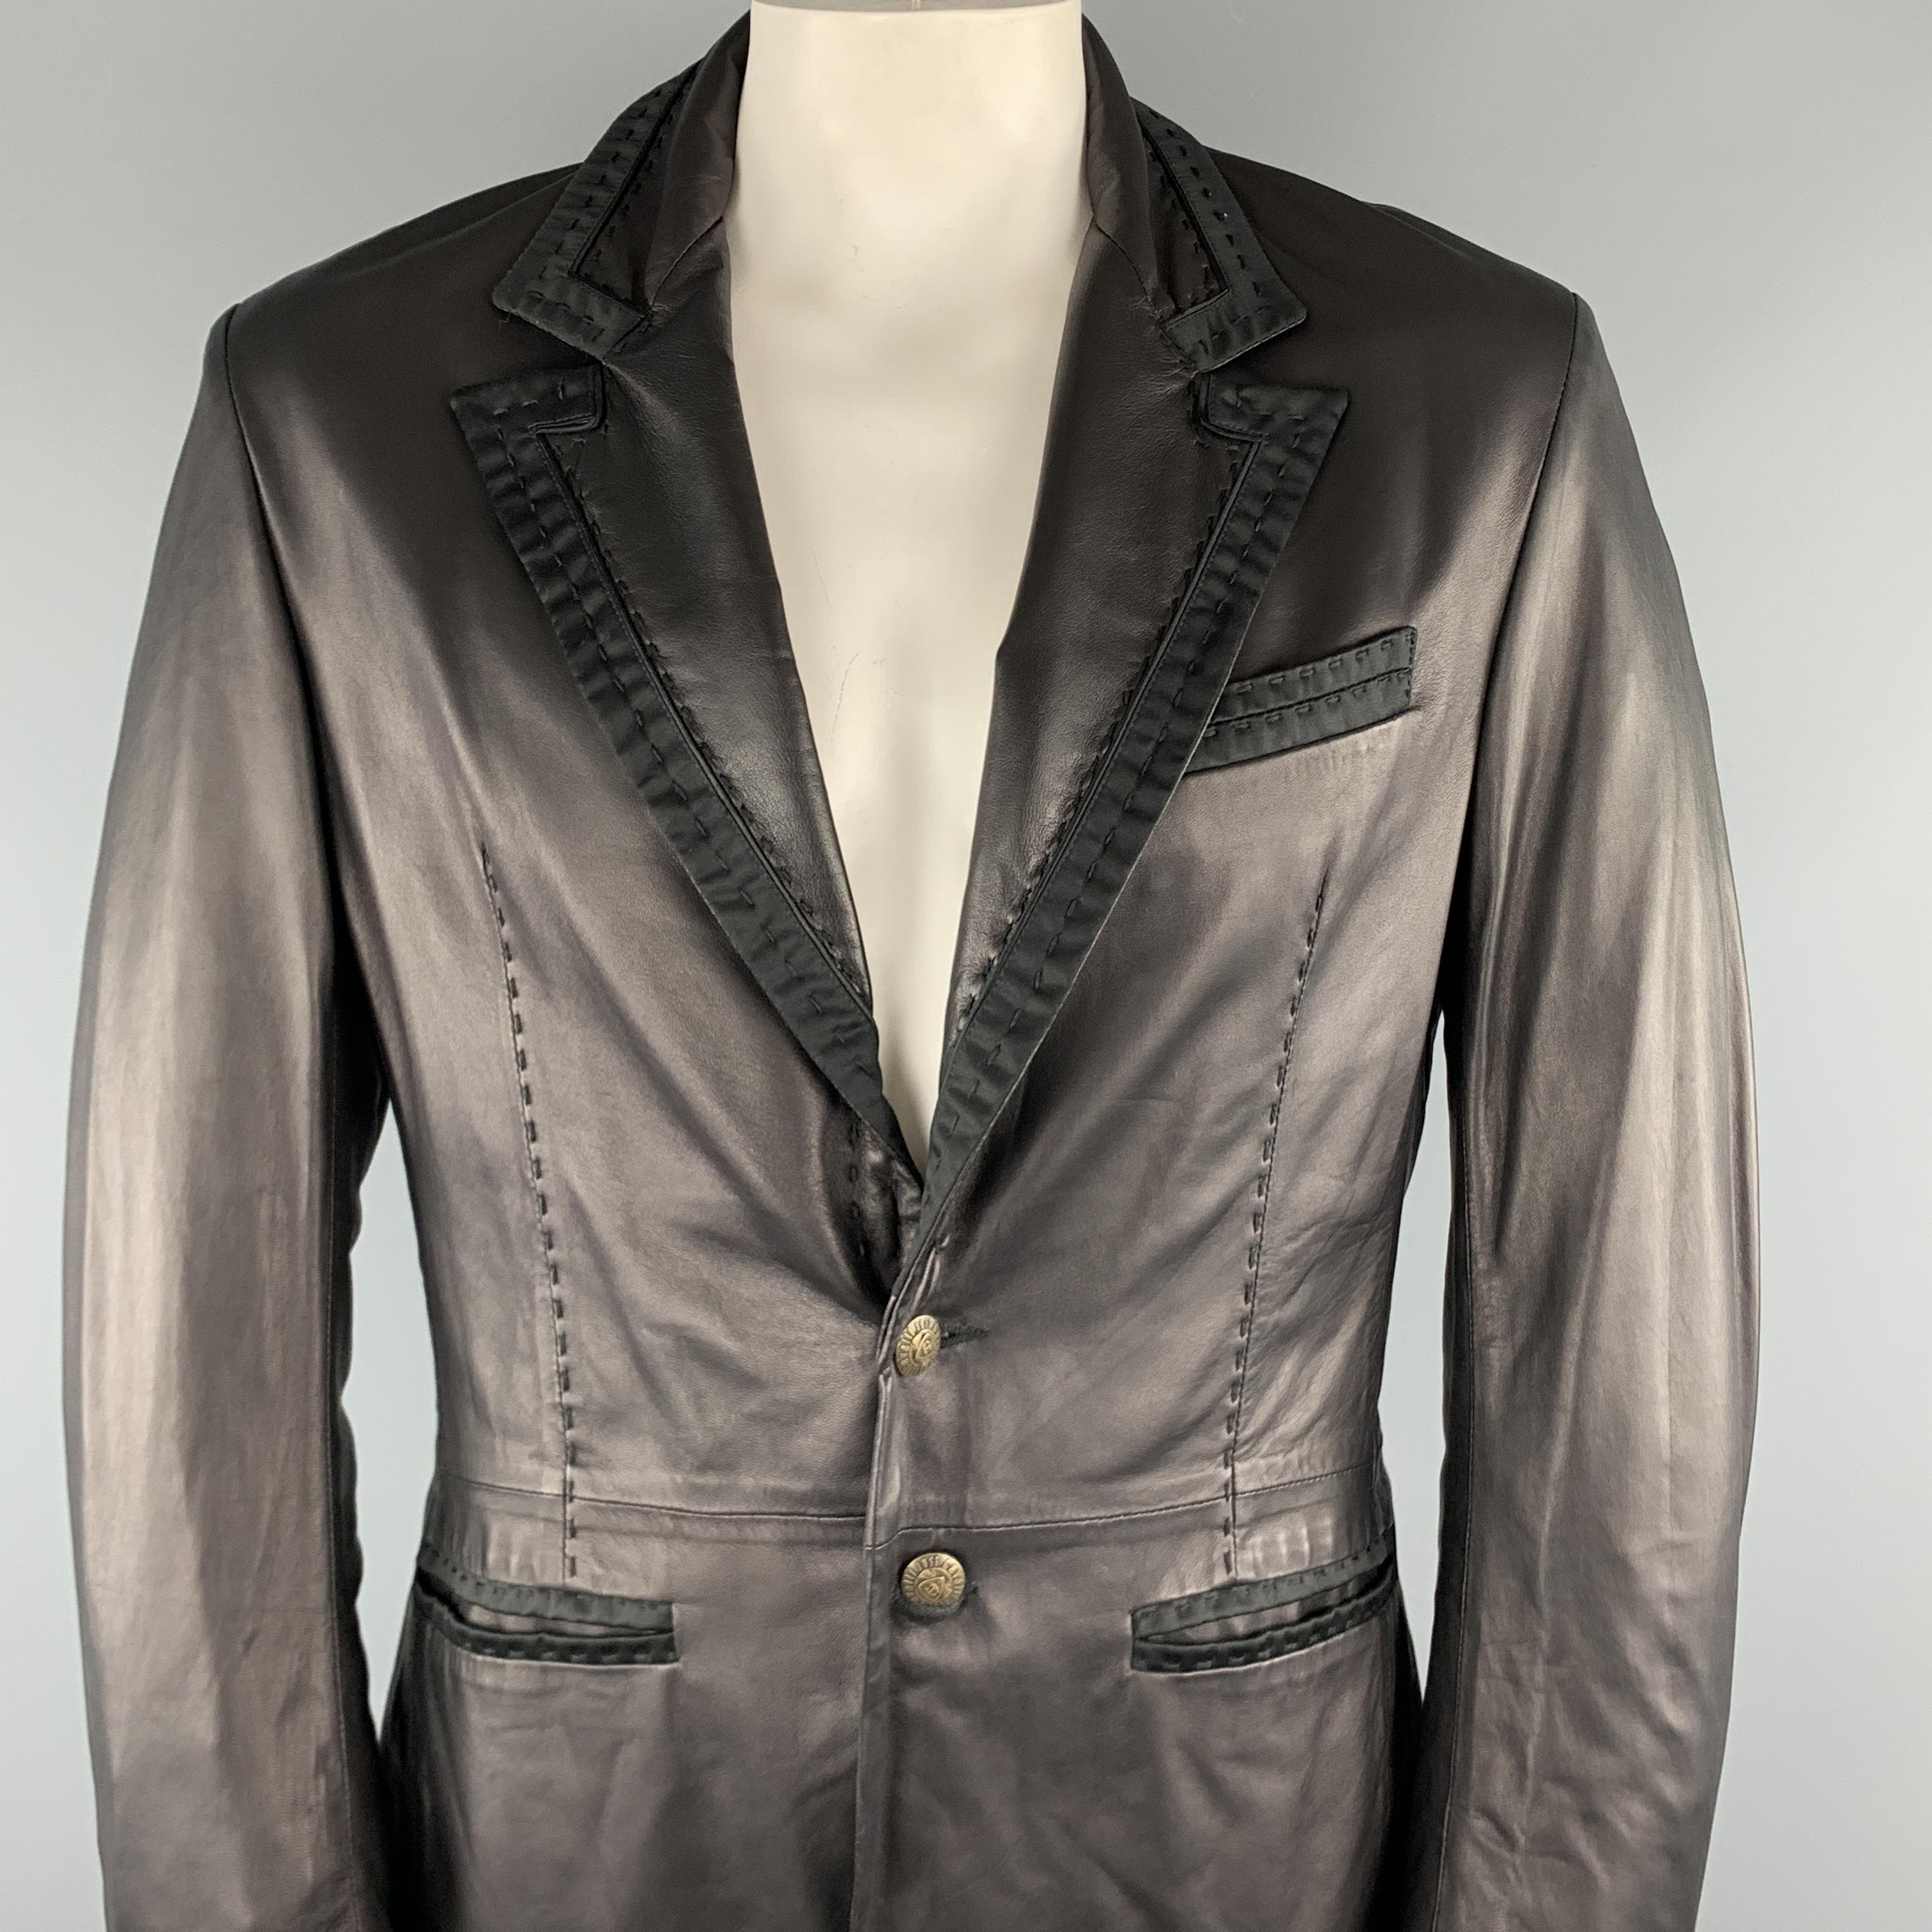 JUST CAVALLI Jacket comes in a black leather featuring a peak lapel style, black trim detail, slit pockets, and a two button closure. Made in Romania.

Excellent Pre-Owned Condition.
Marked: XXL

Measurements:

Shoulder: 18 in. 
Chest: 44